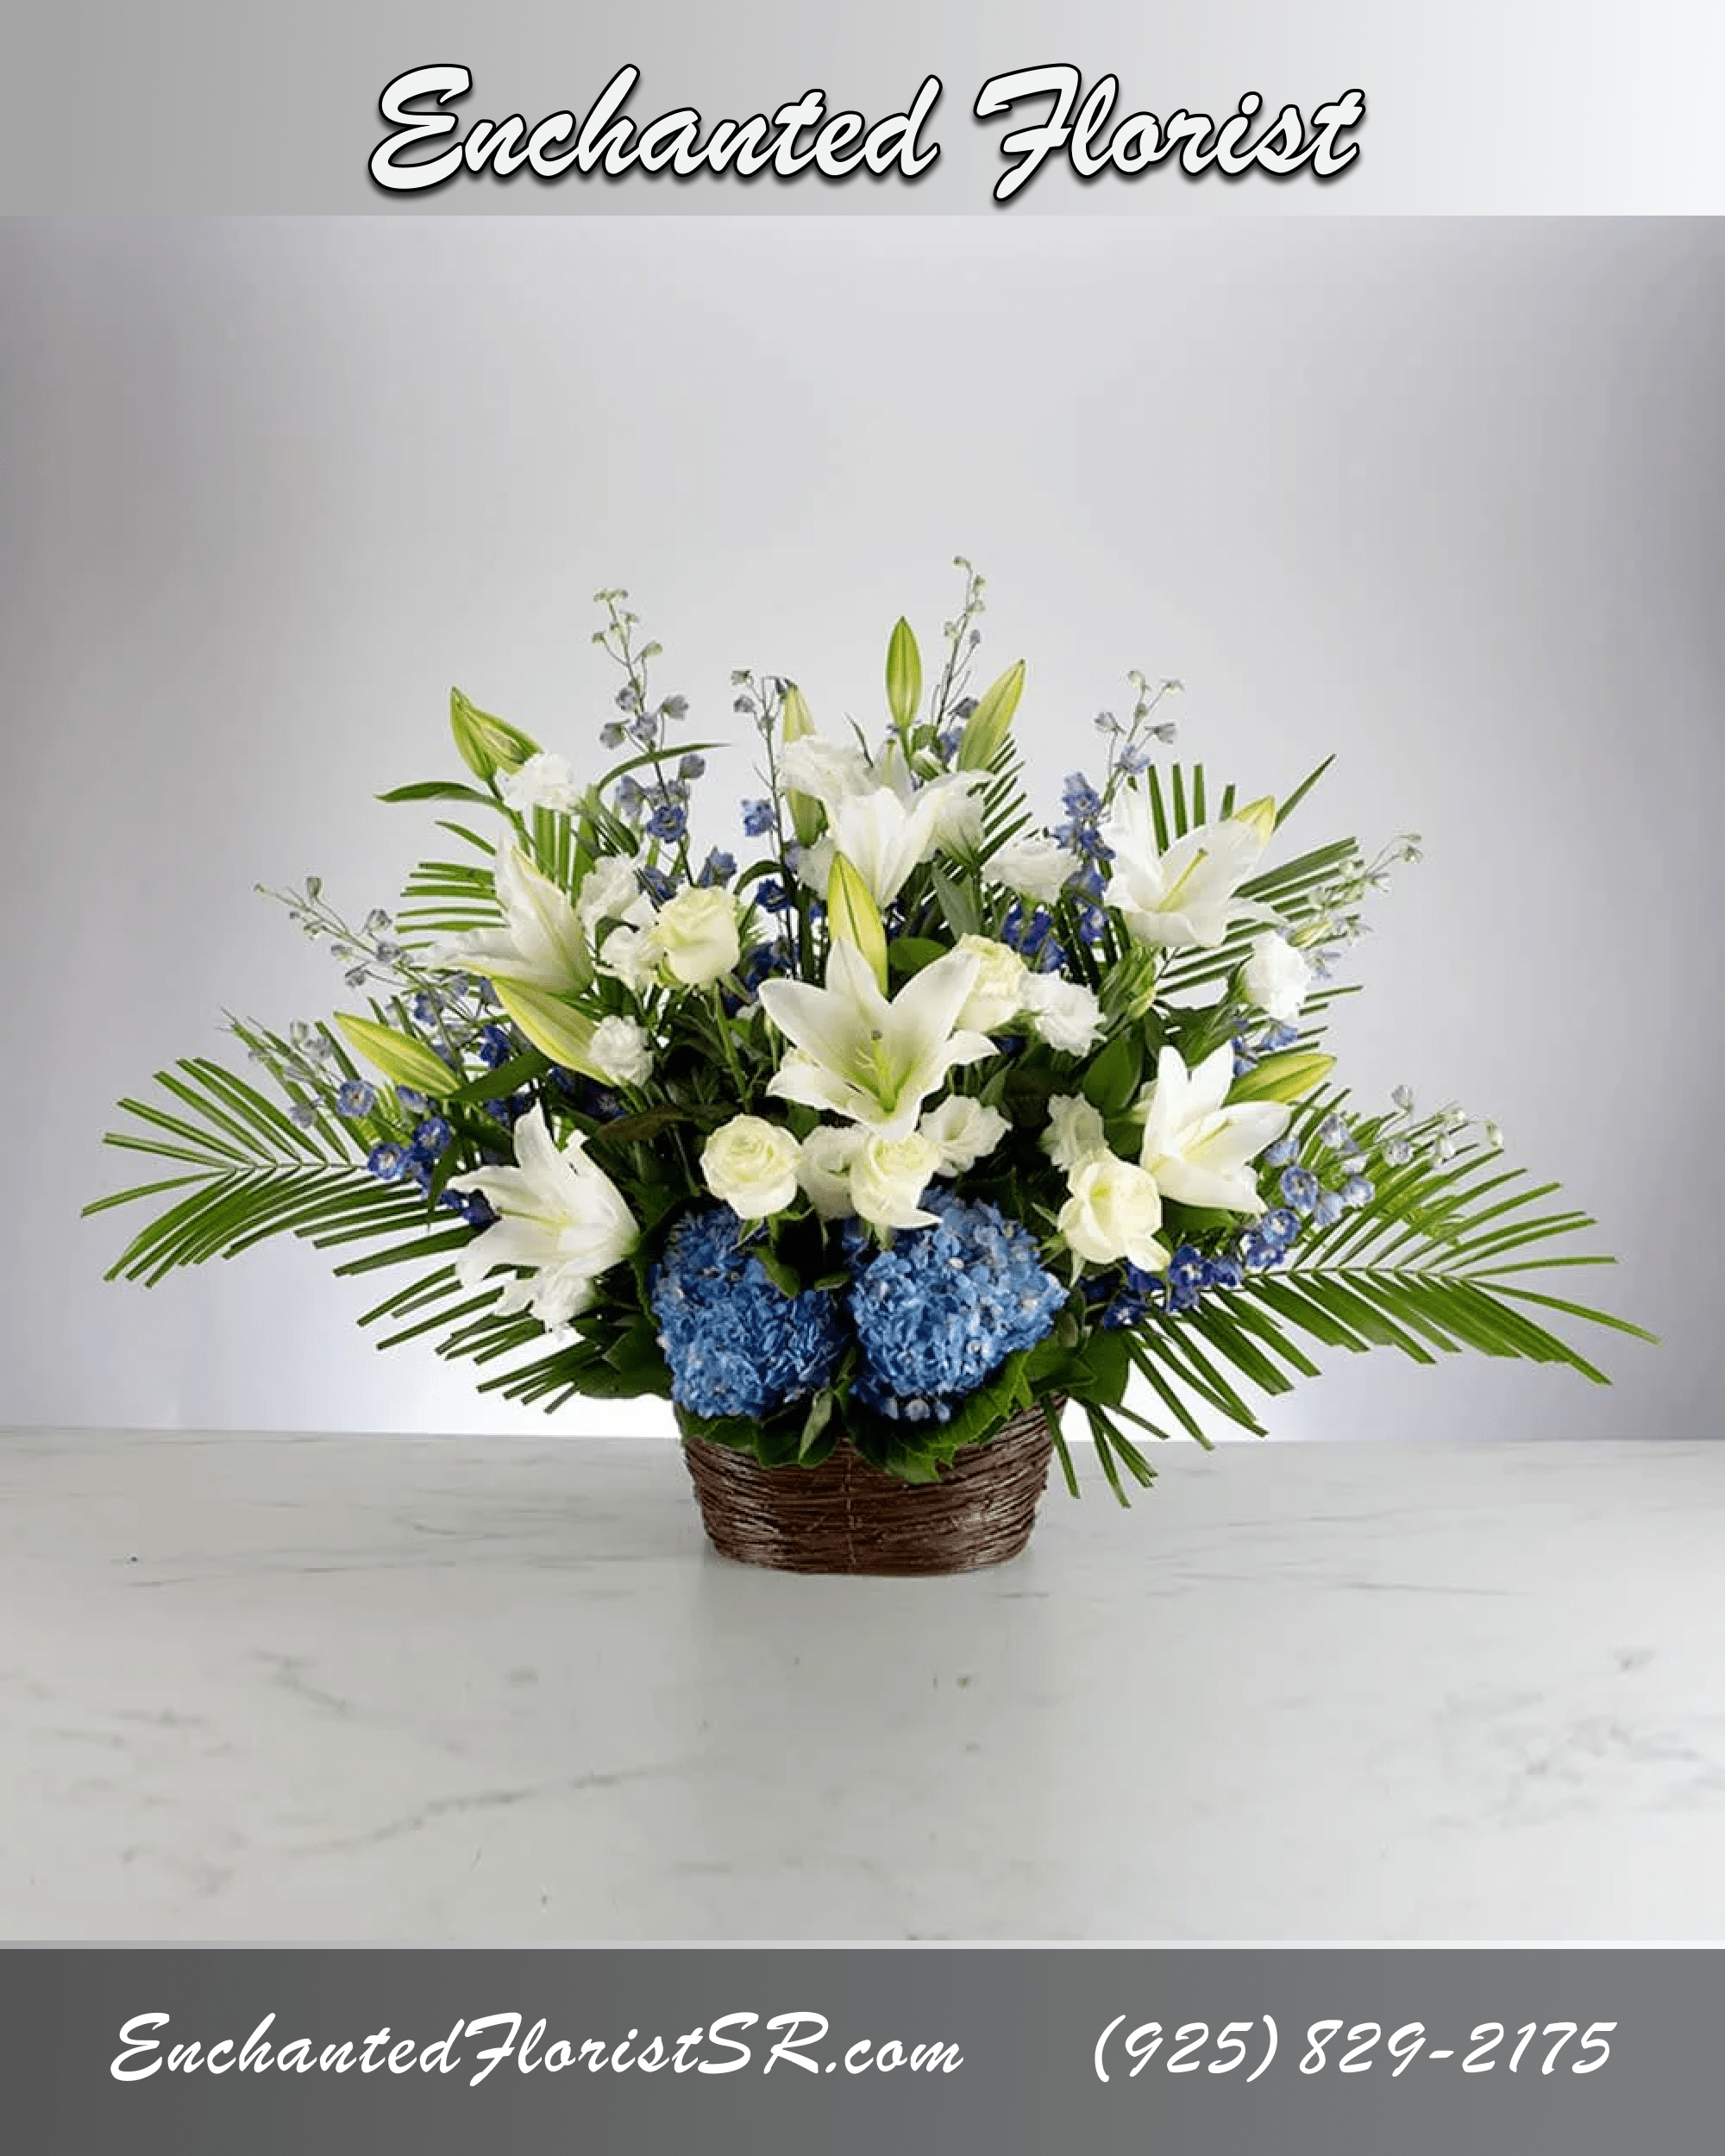 Deepest Condolences -  - A blue, white, and green funeral basket for any type of service. Held in a wicker basket, large palms spread out and give a natural spotlight for the feature blooms and colors.